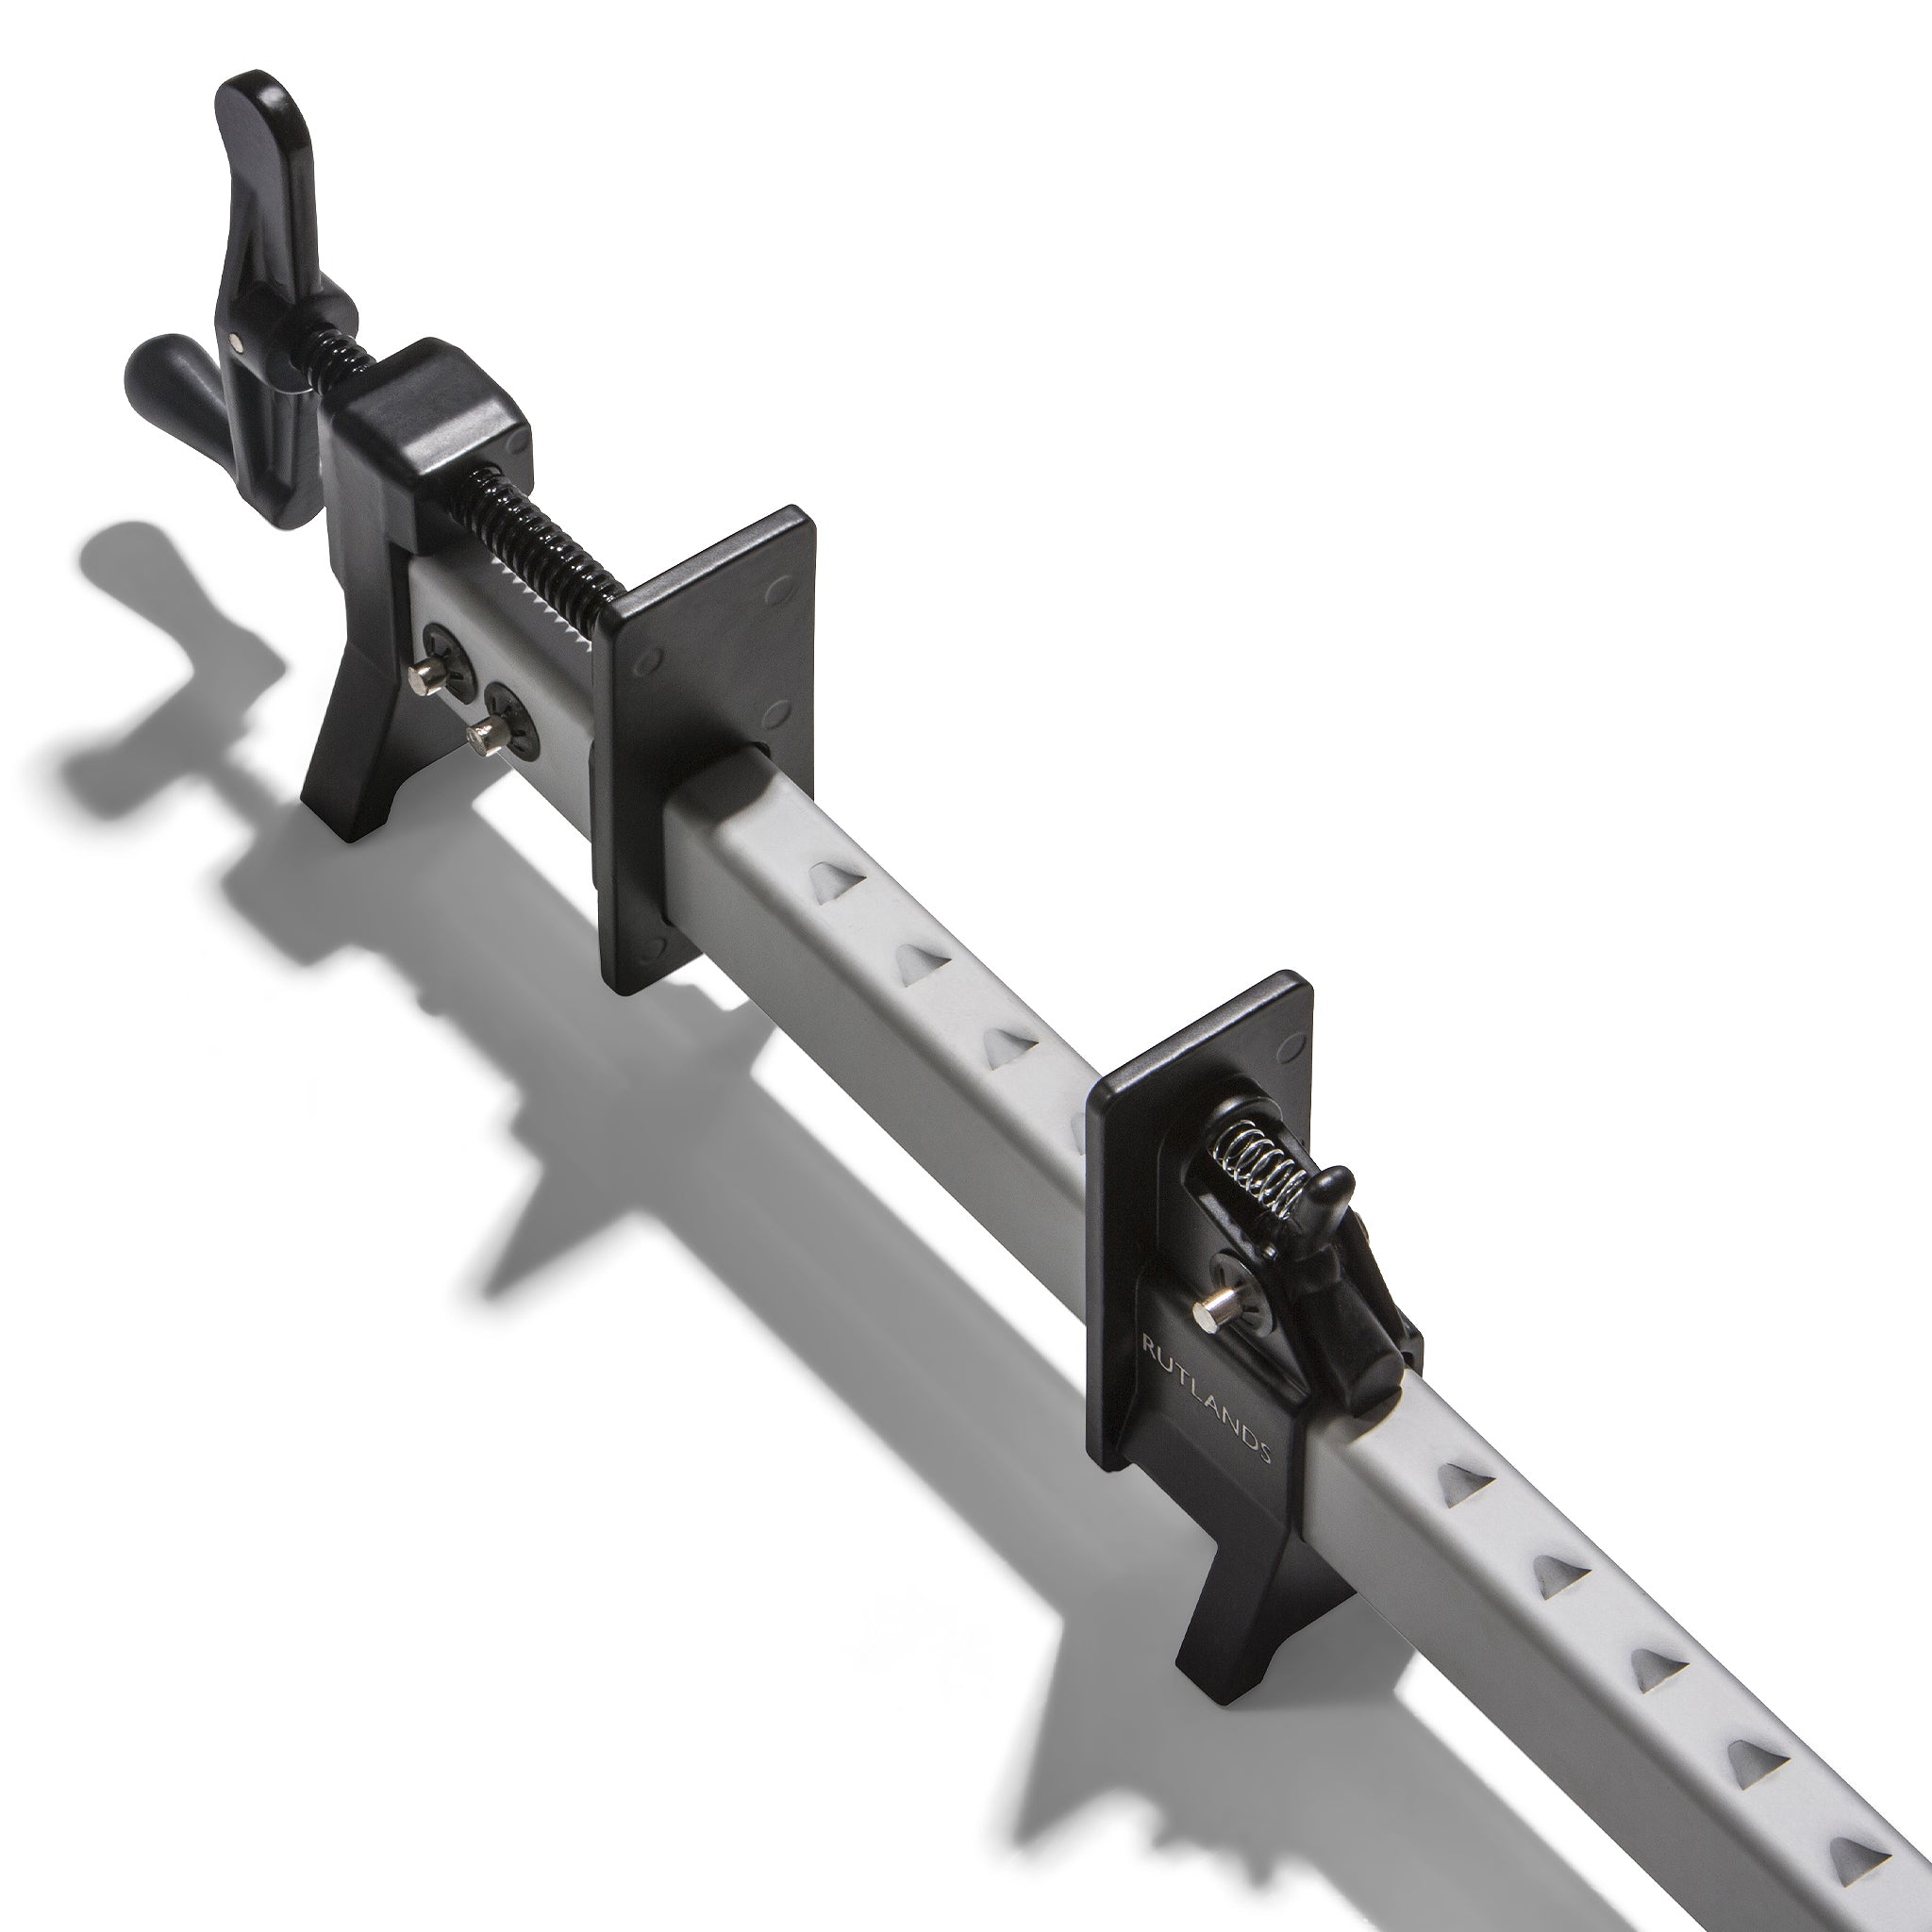 Aluminium Sash Clamps with Feet - 600mm - Pack of 4